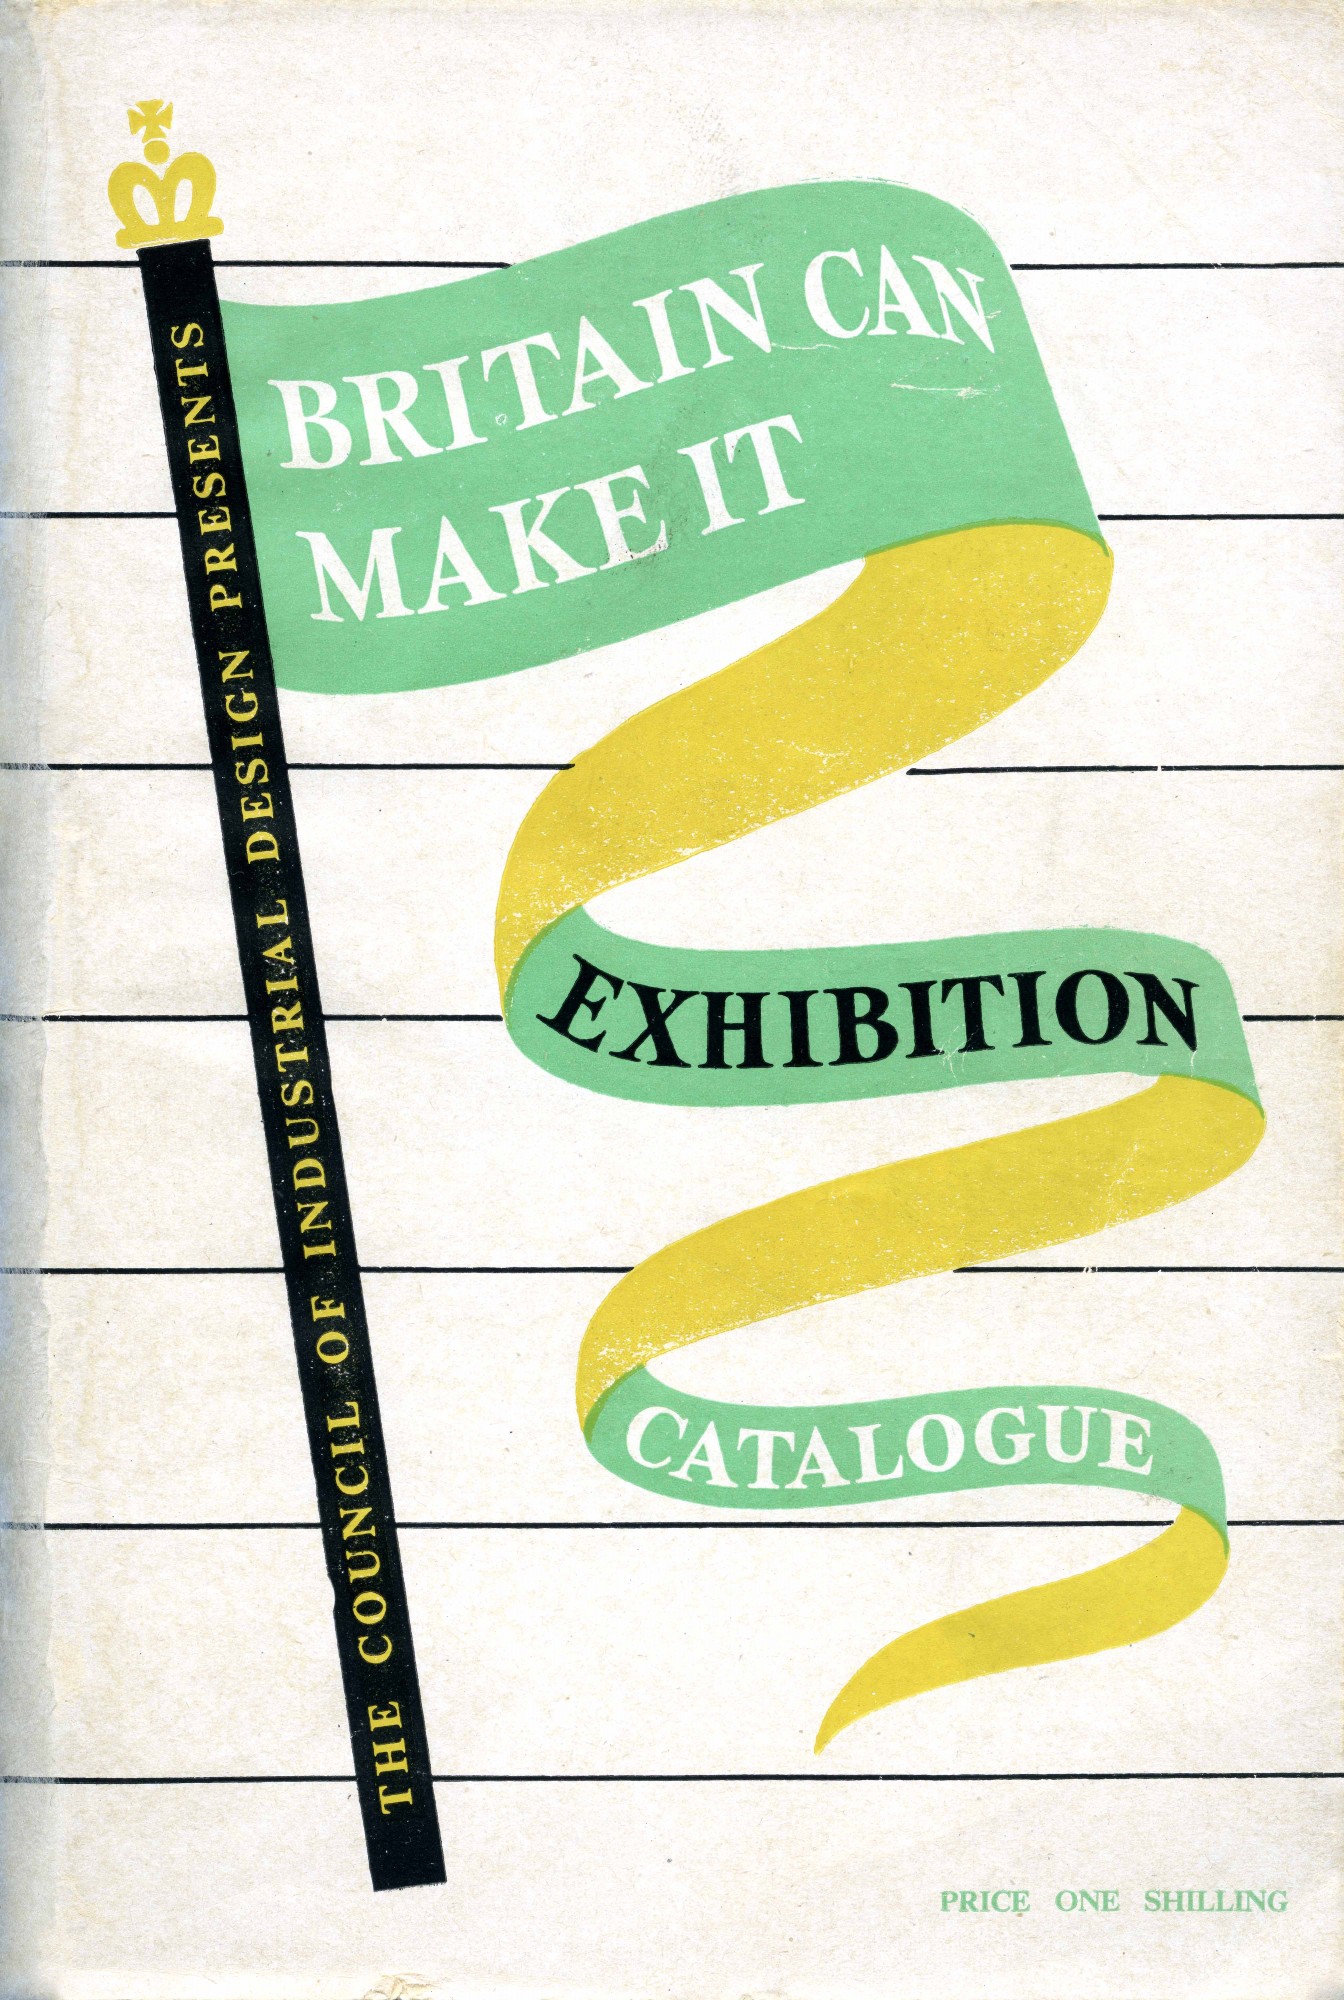 Britain Can Make It catalogue cover showing a flag post and flag design in yellow, black and green